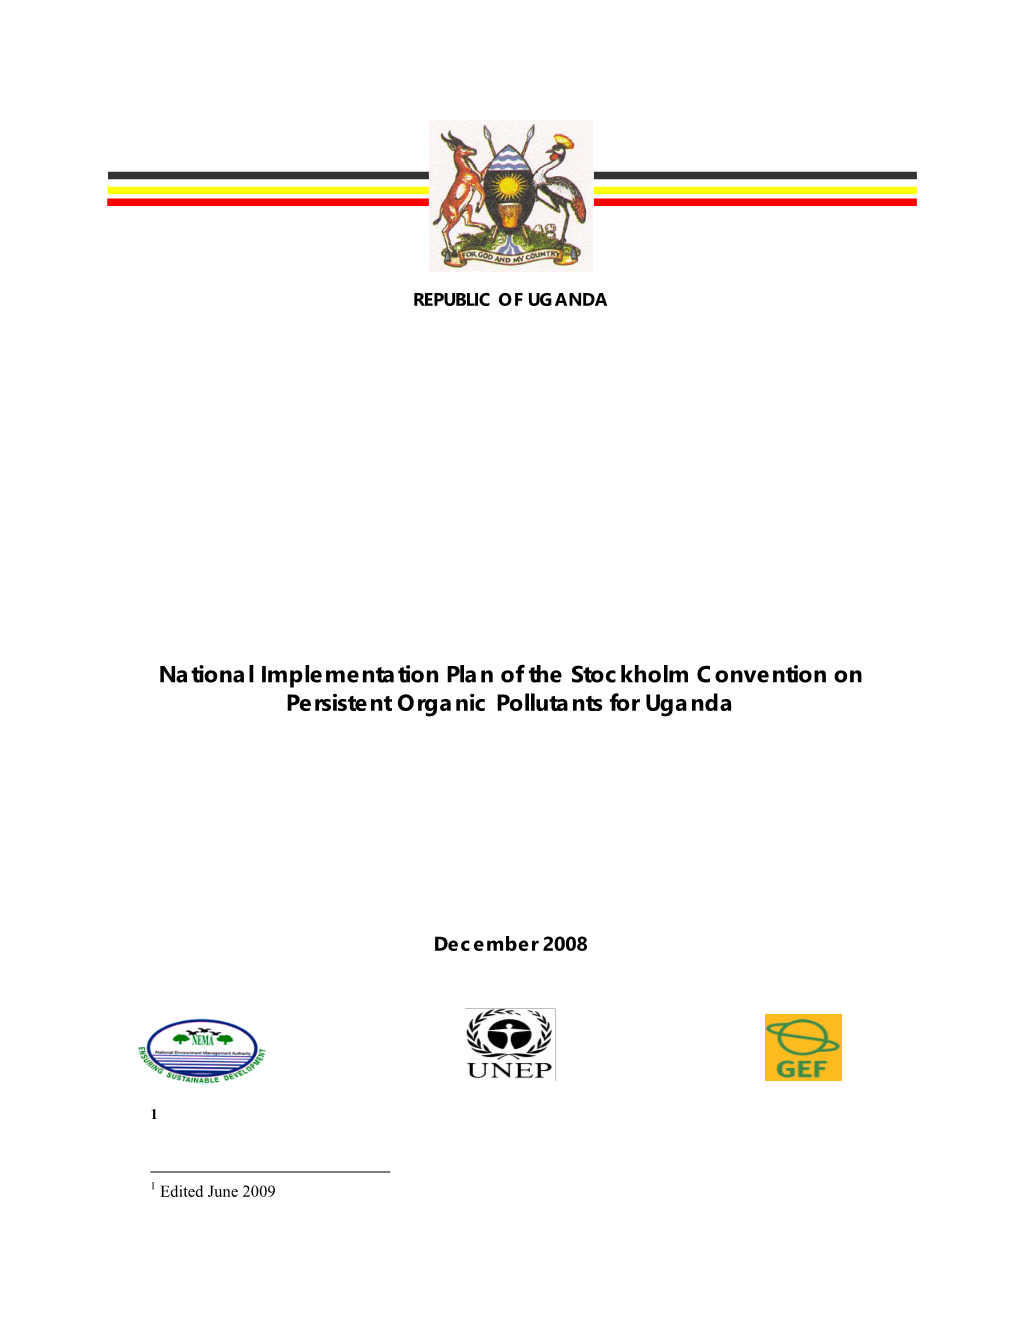 National Implementation Plan of the Stockholm Convention on Persistent Organic Pollutants for Uganda